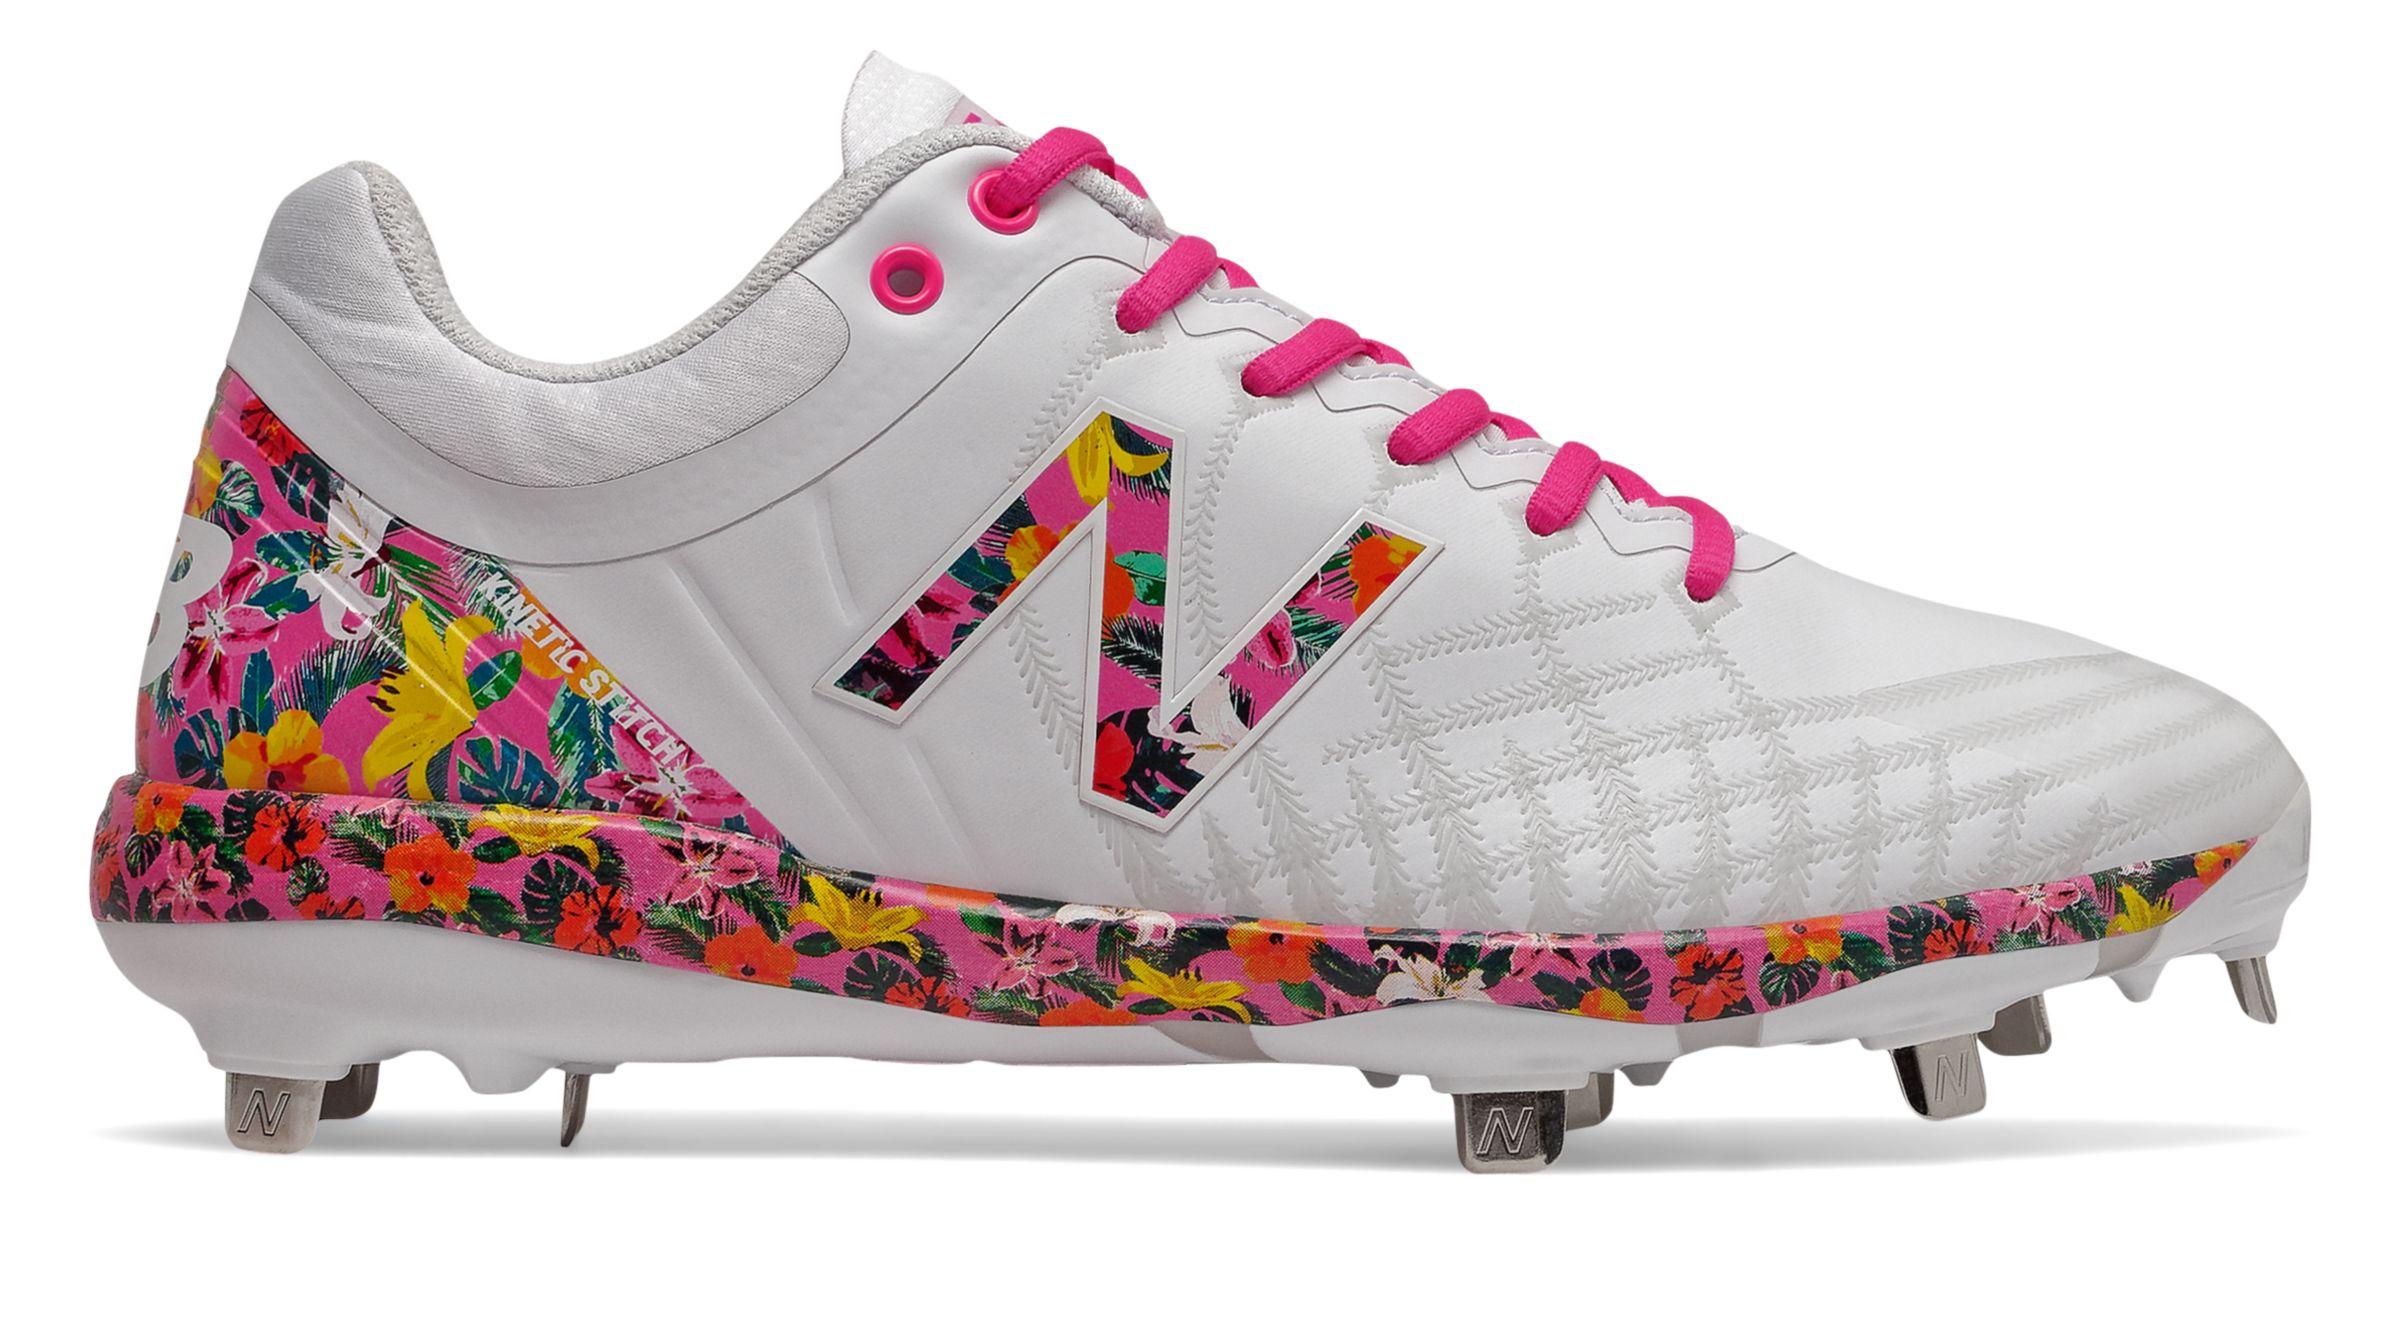 New Balance Mothers Day 4040v5 Cleats And Turf Shoes in White/Pink ...